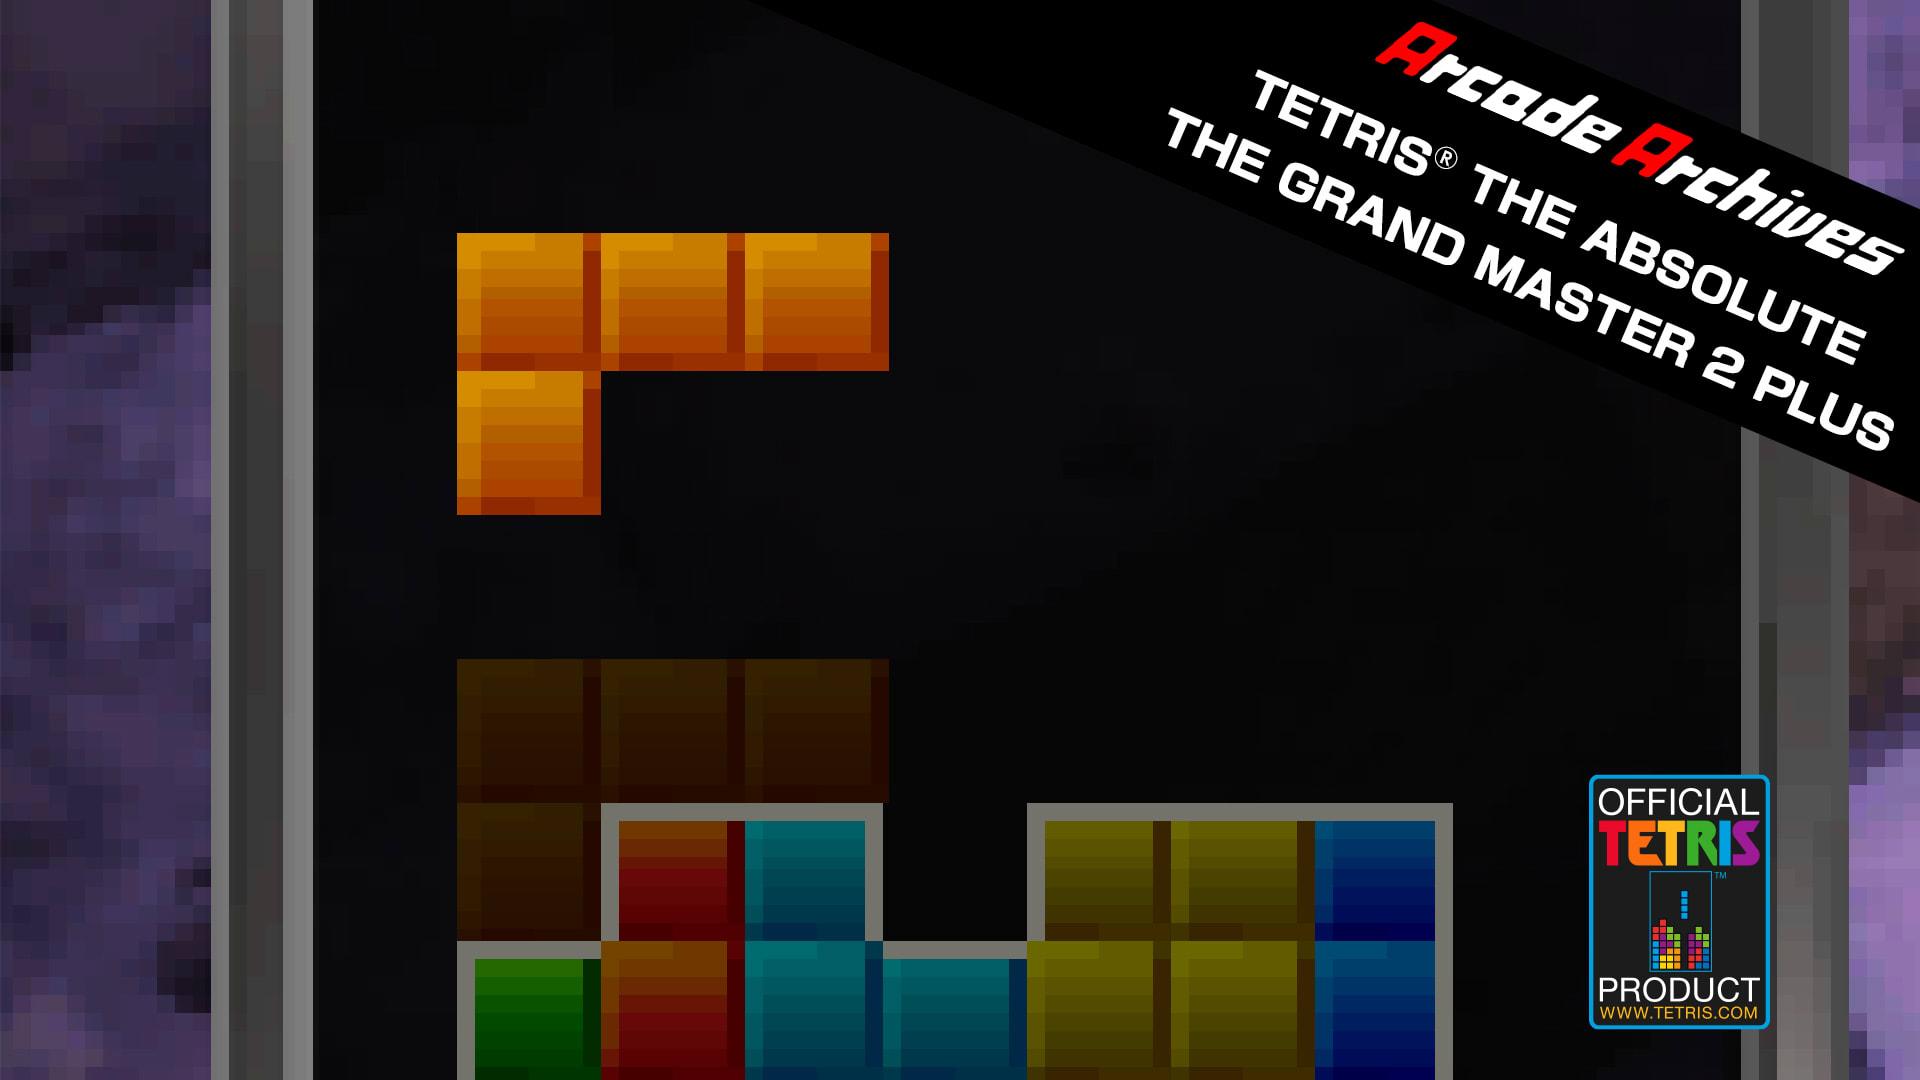 Arcade Archives TETRIS® THE ABSOLUTE THE GRAND MASTER 2 PLUS 1